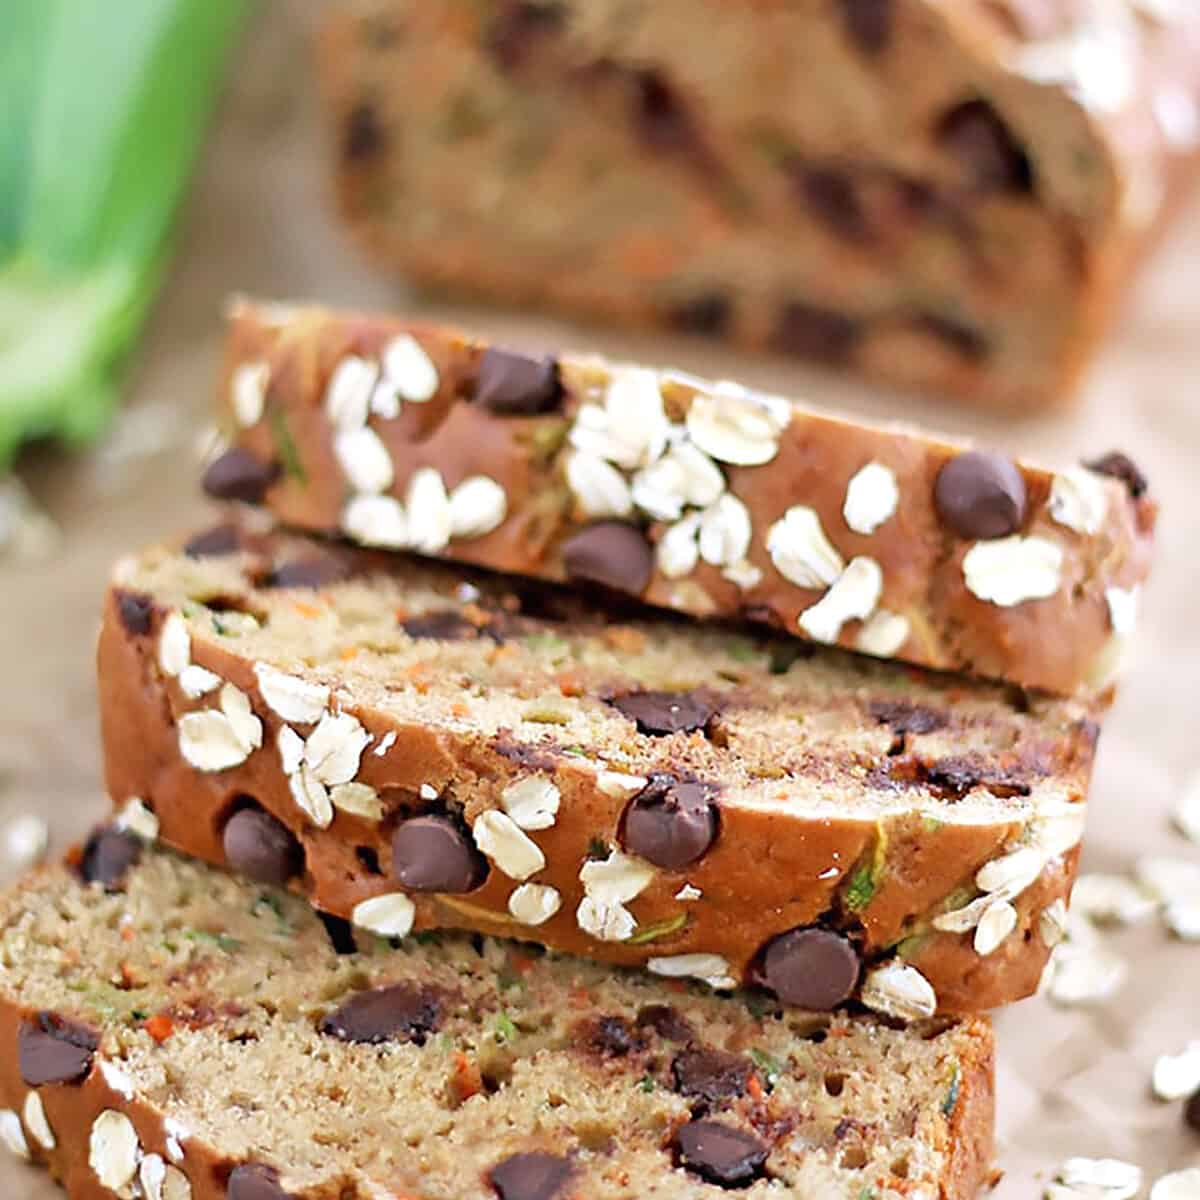 We are overloaded with carrots and zucchini in my garden this year. So, I thought I'd play with them and create some recipes. I literally tossed all ingredients together in just a few minutes is how this Greek Yogurt Carrot Zucchini Bread with Dark Chocolate Chip was created.